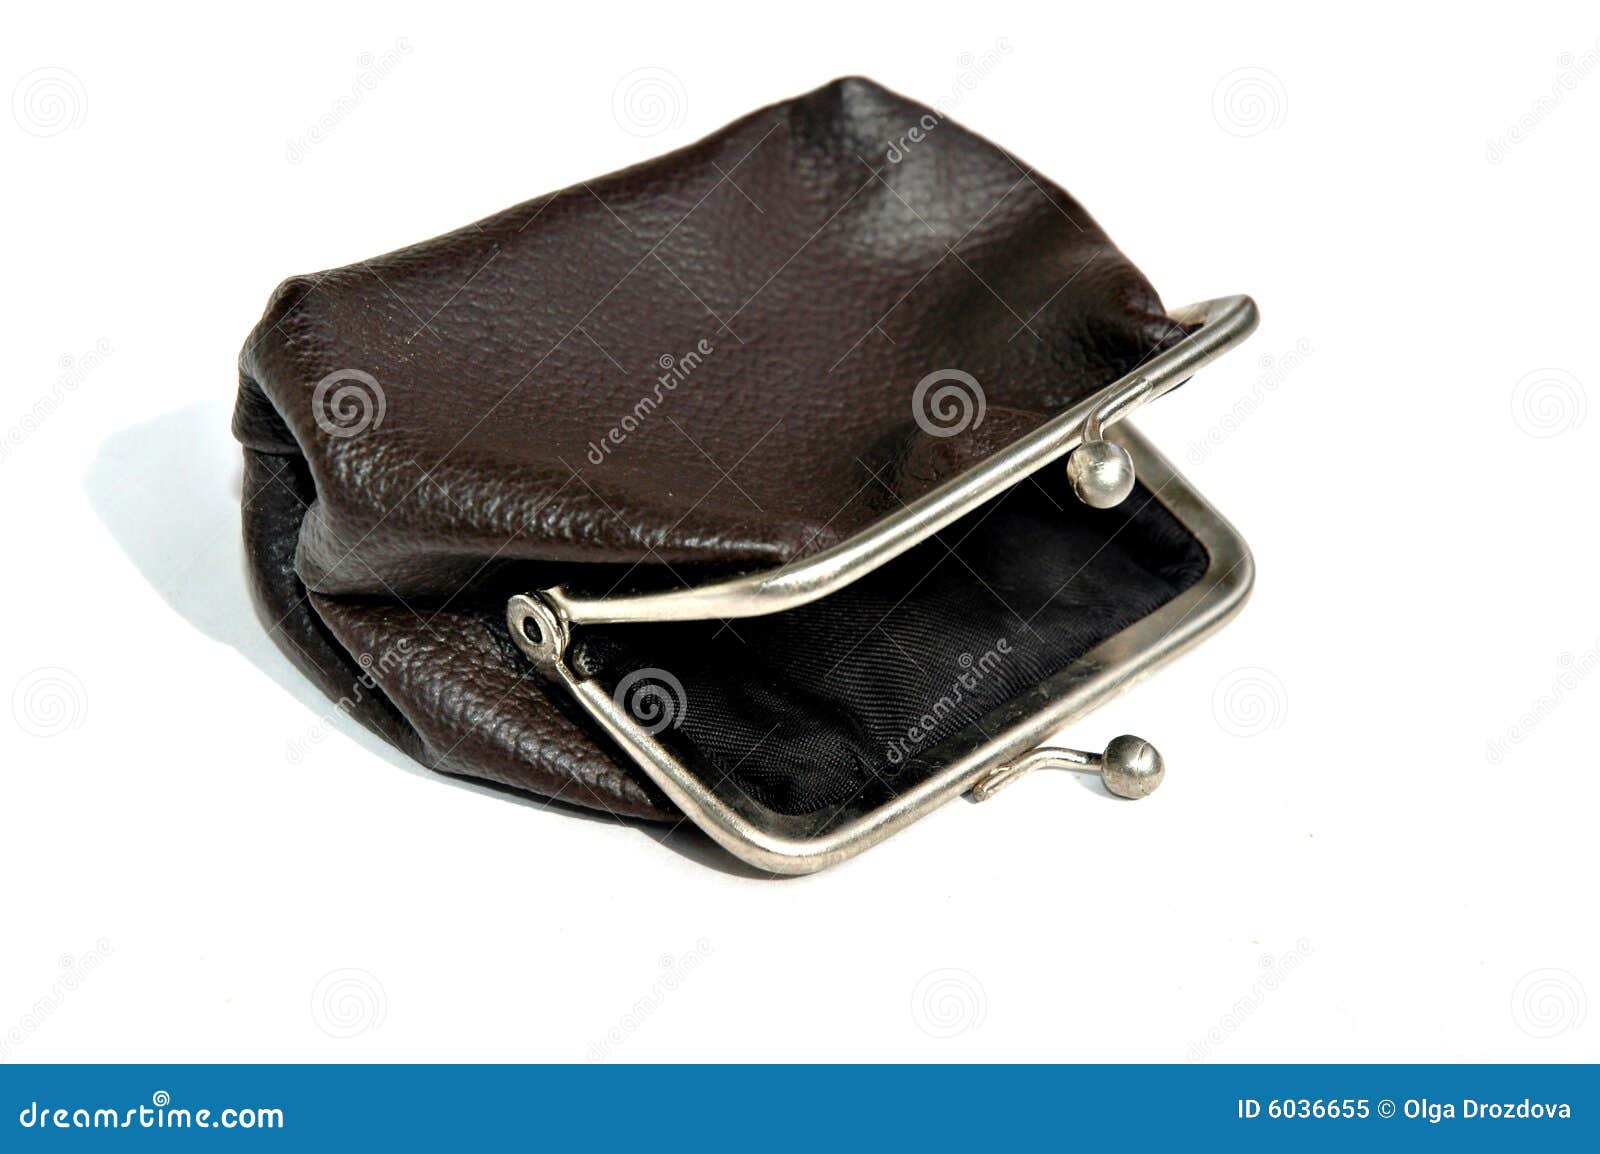 Old fashioned coin purse stock image. Image of empty, metal - 6036655